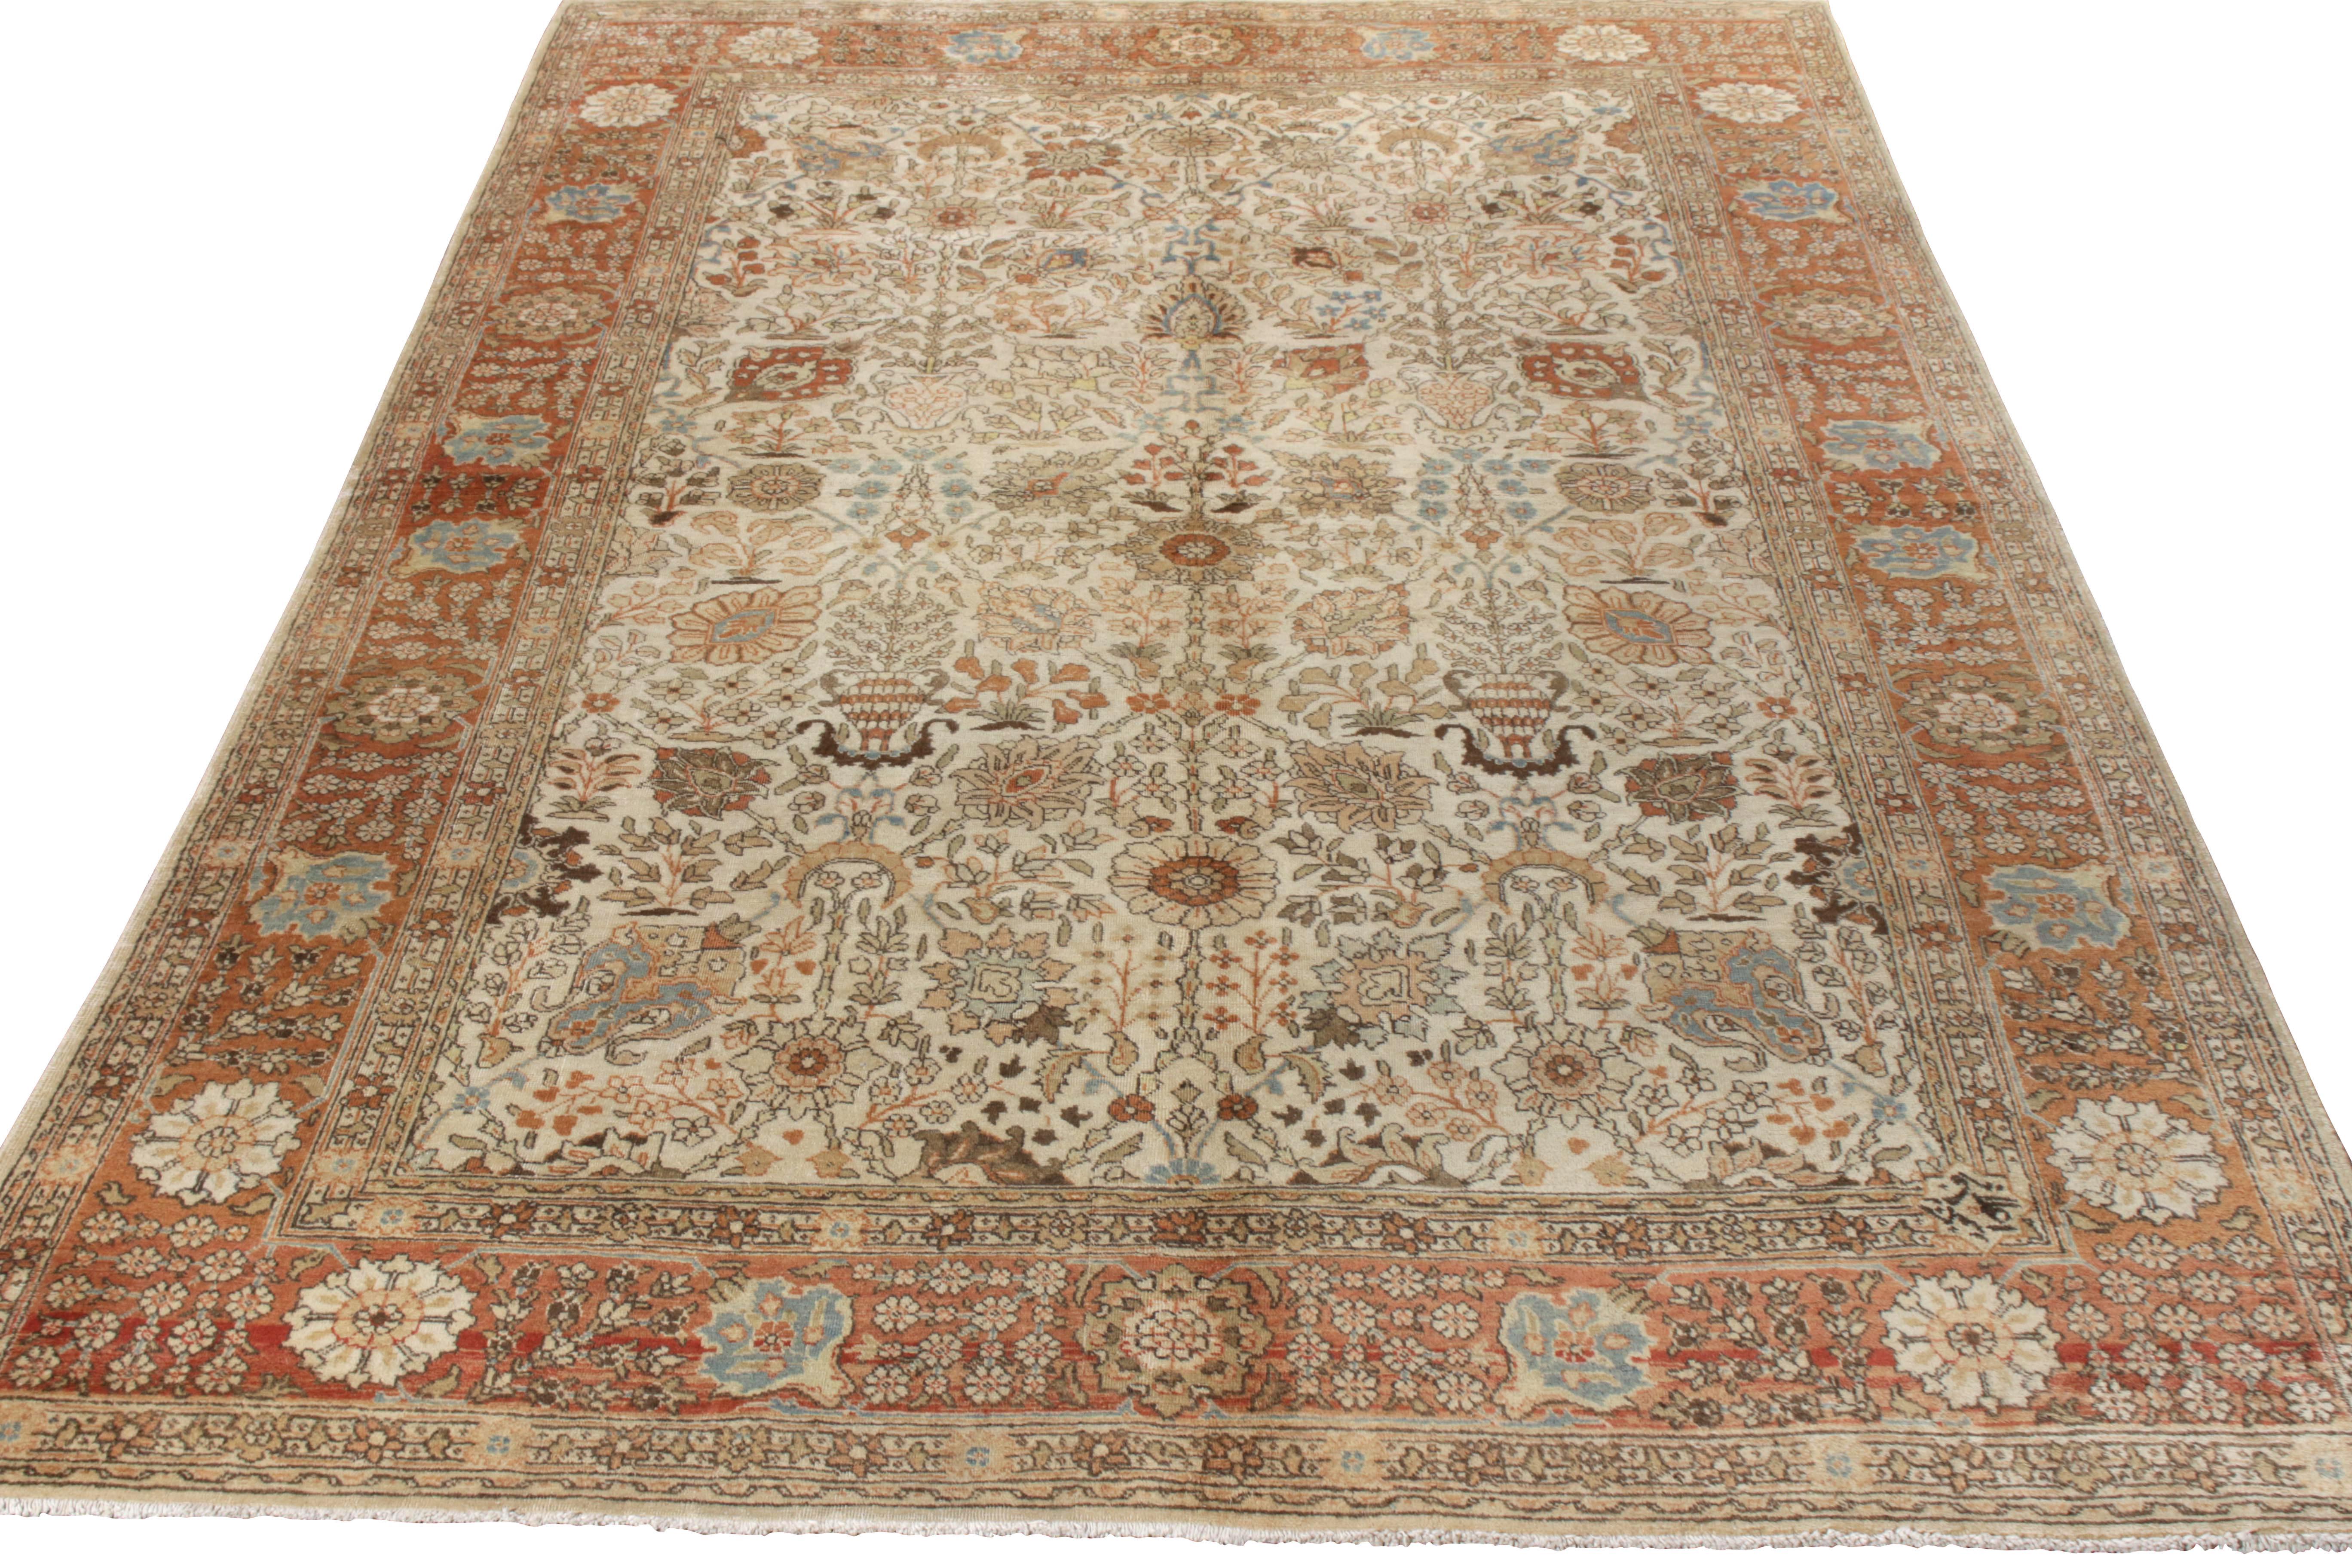 Hand Knotted in wool, a very beautiful antique Tabriz garden rug design originating circa 1920-1930, now joining Rug & Kilim’s Antique & Vintage collection. Exhibiting a spectacular show of Persian sensibilities, the 7x10 graph features an awe